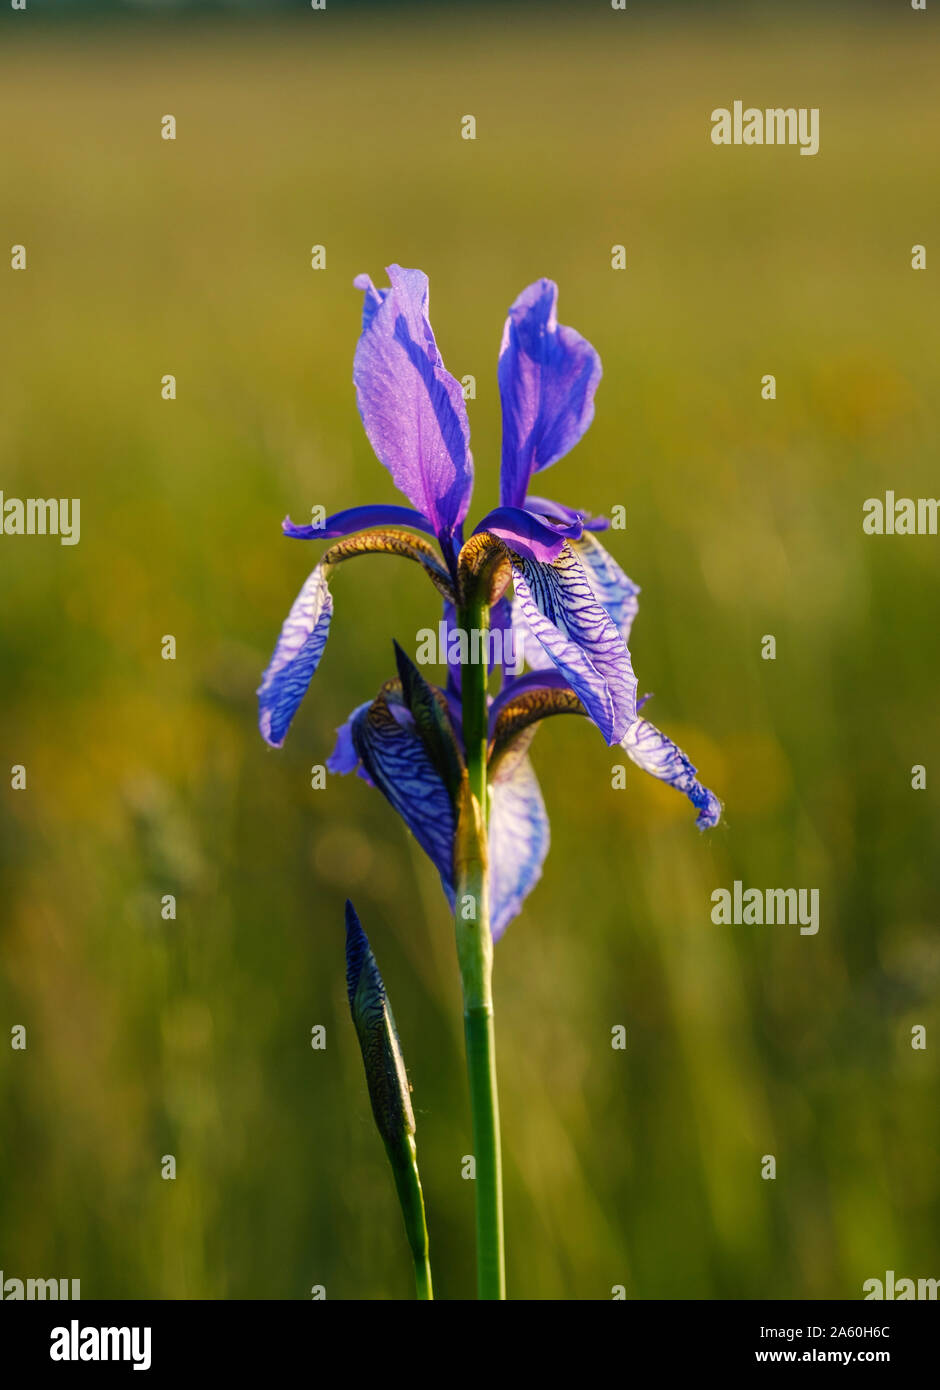 Close-up of purple iris flower blooming outdoors, Bavaria, Germany Stock Photo